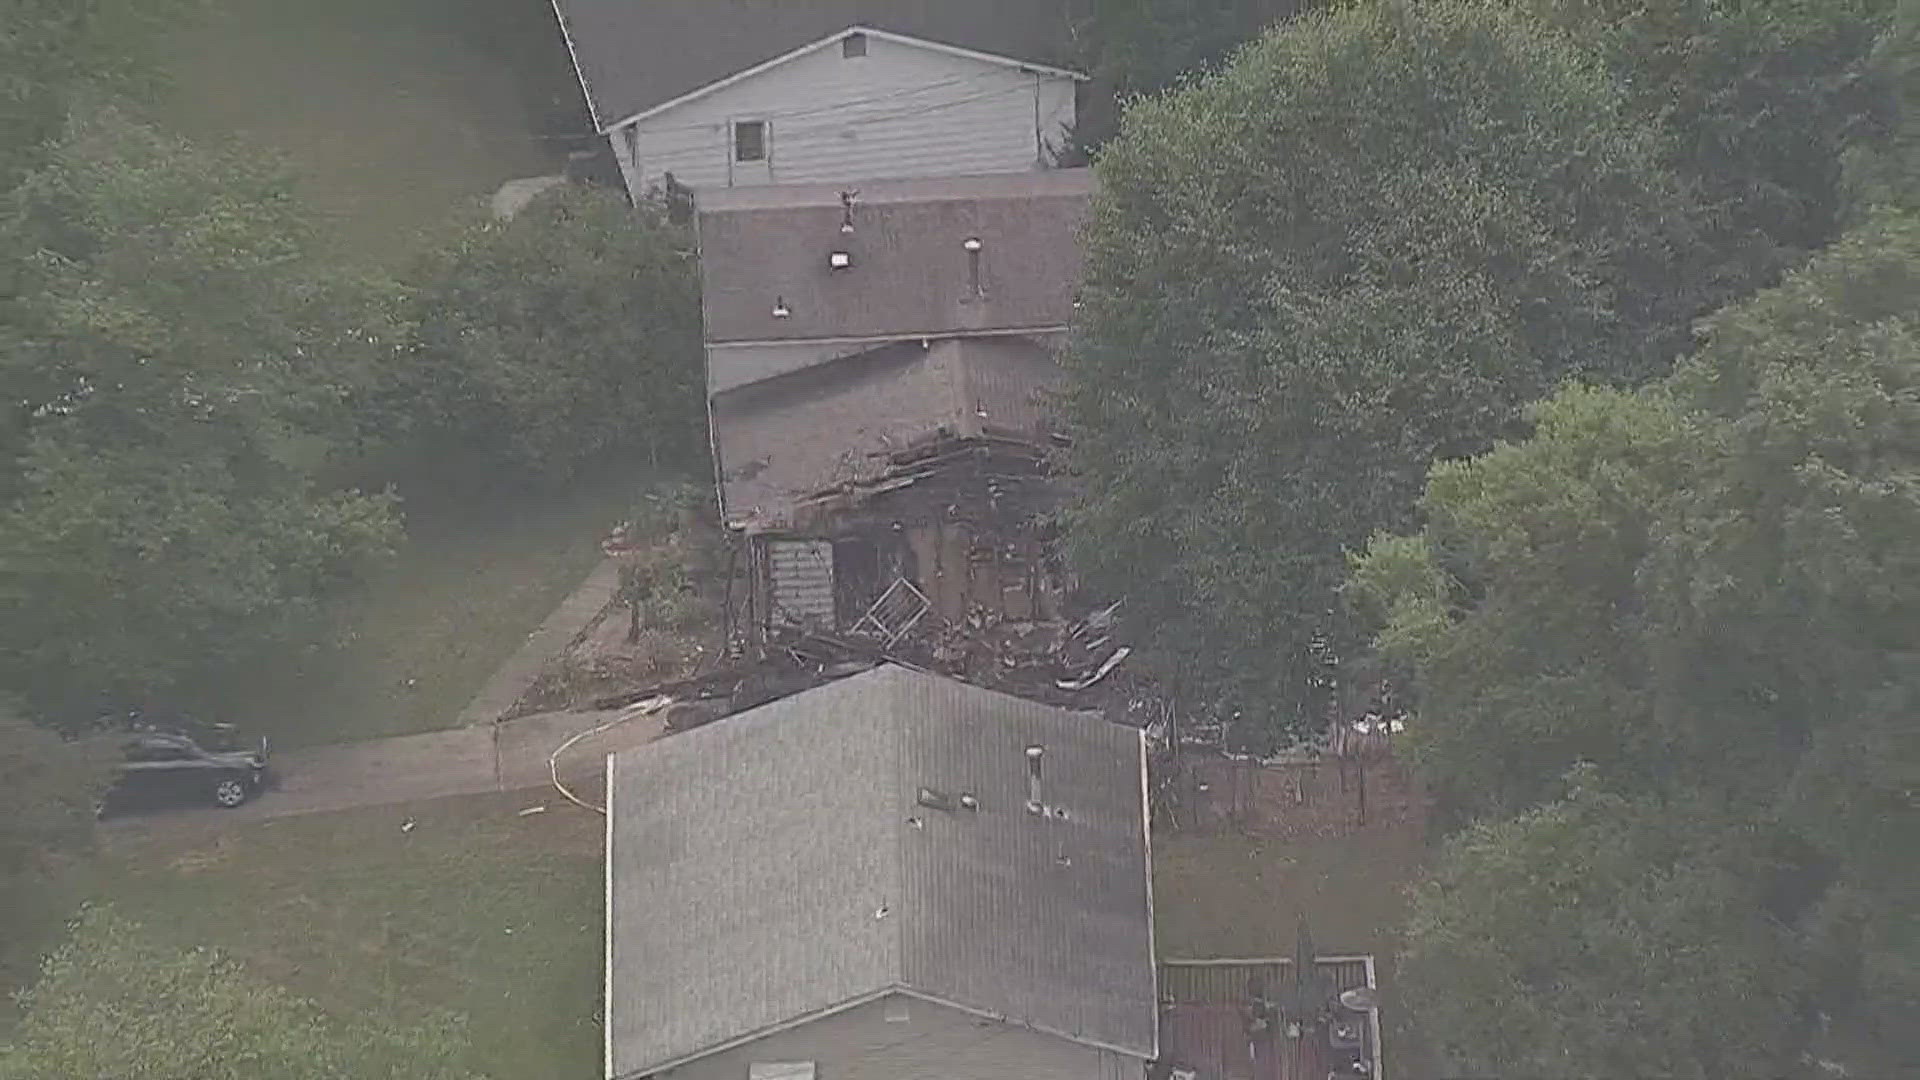 Investigators estimate the costs of damage to the house is around $500,000